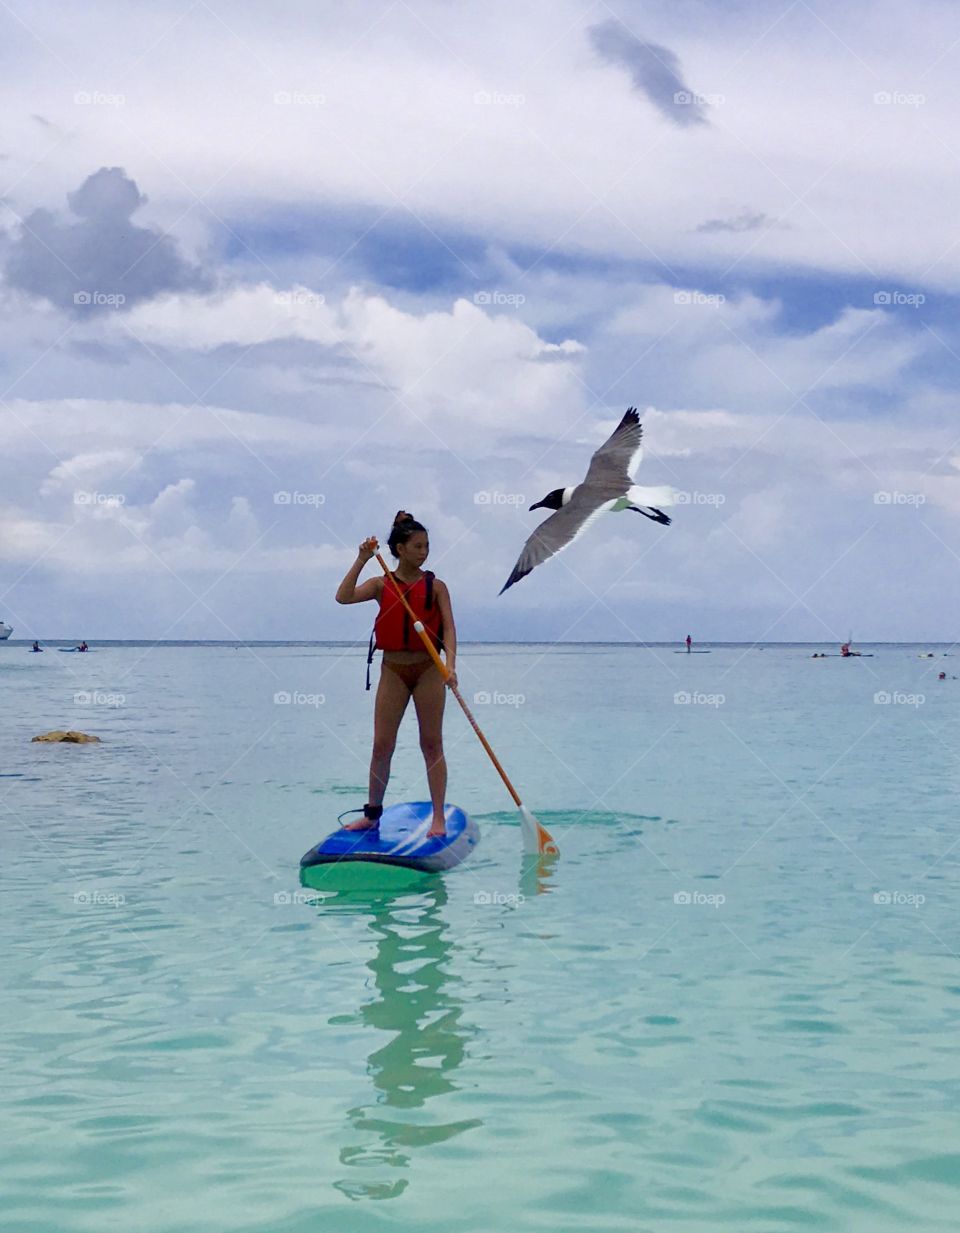 Close encounters- seagull flew over girl paddle boarding 